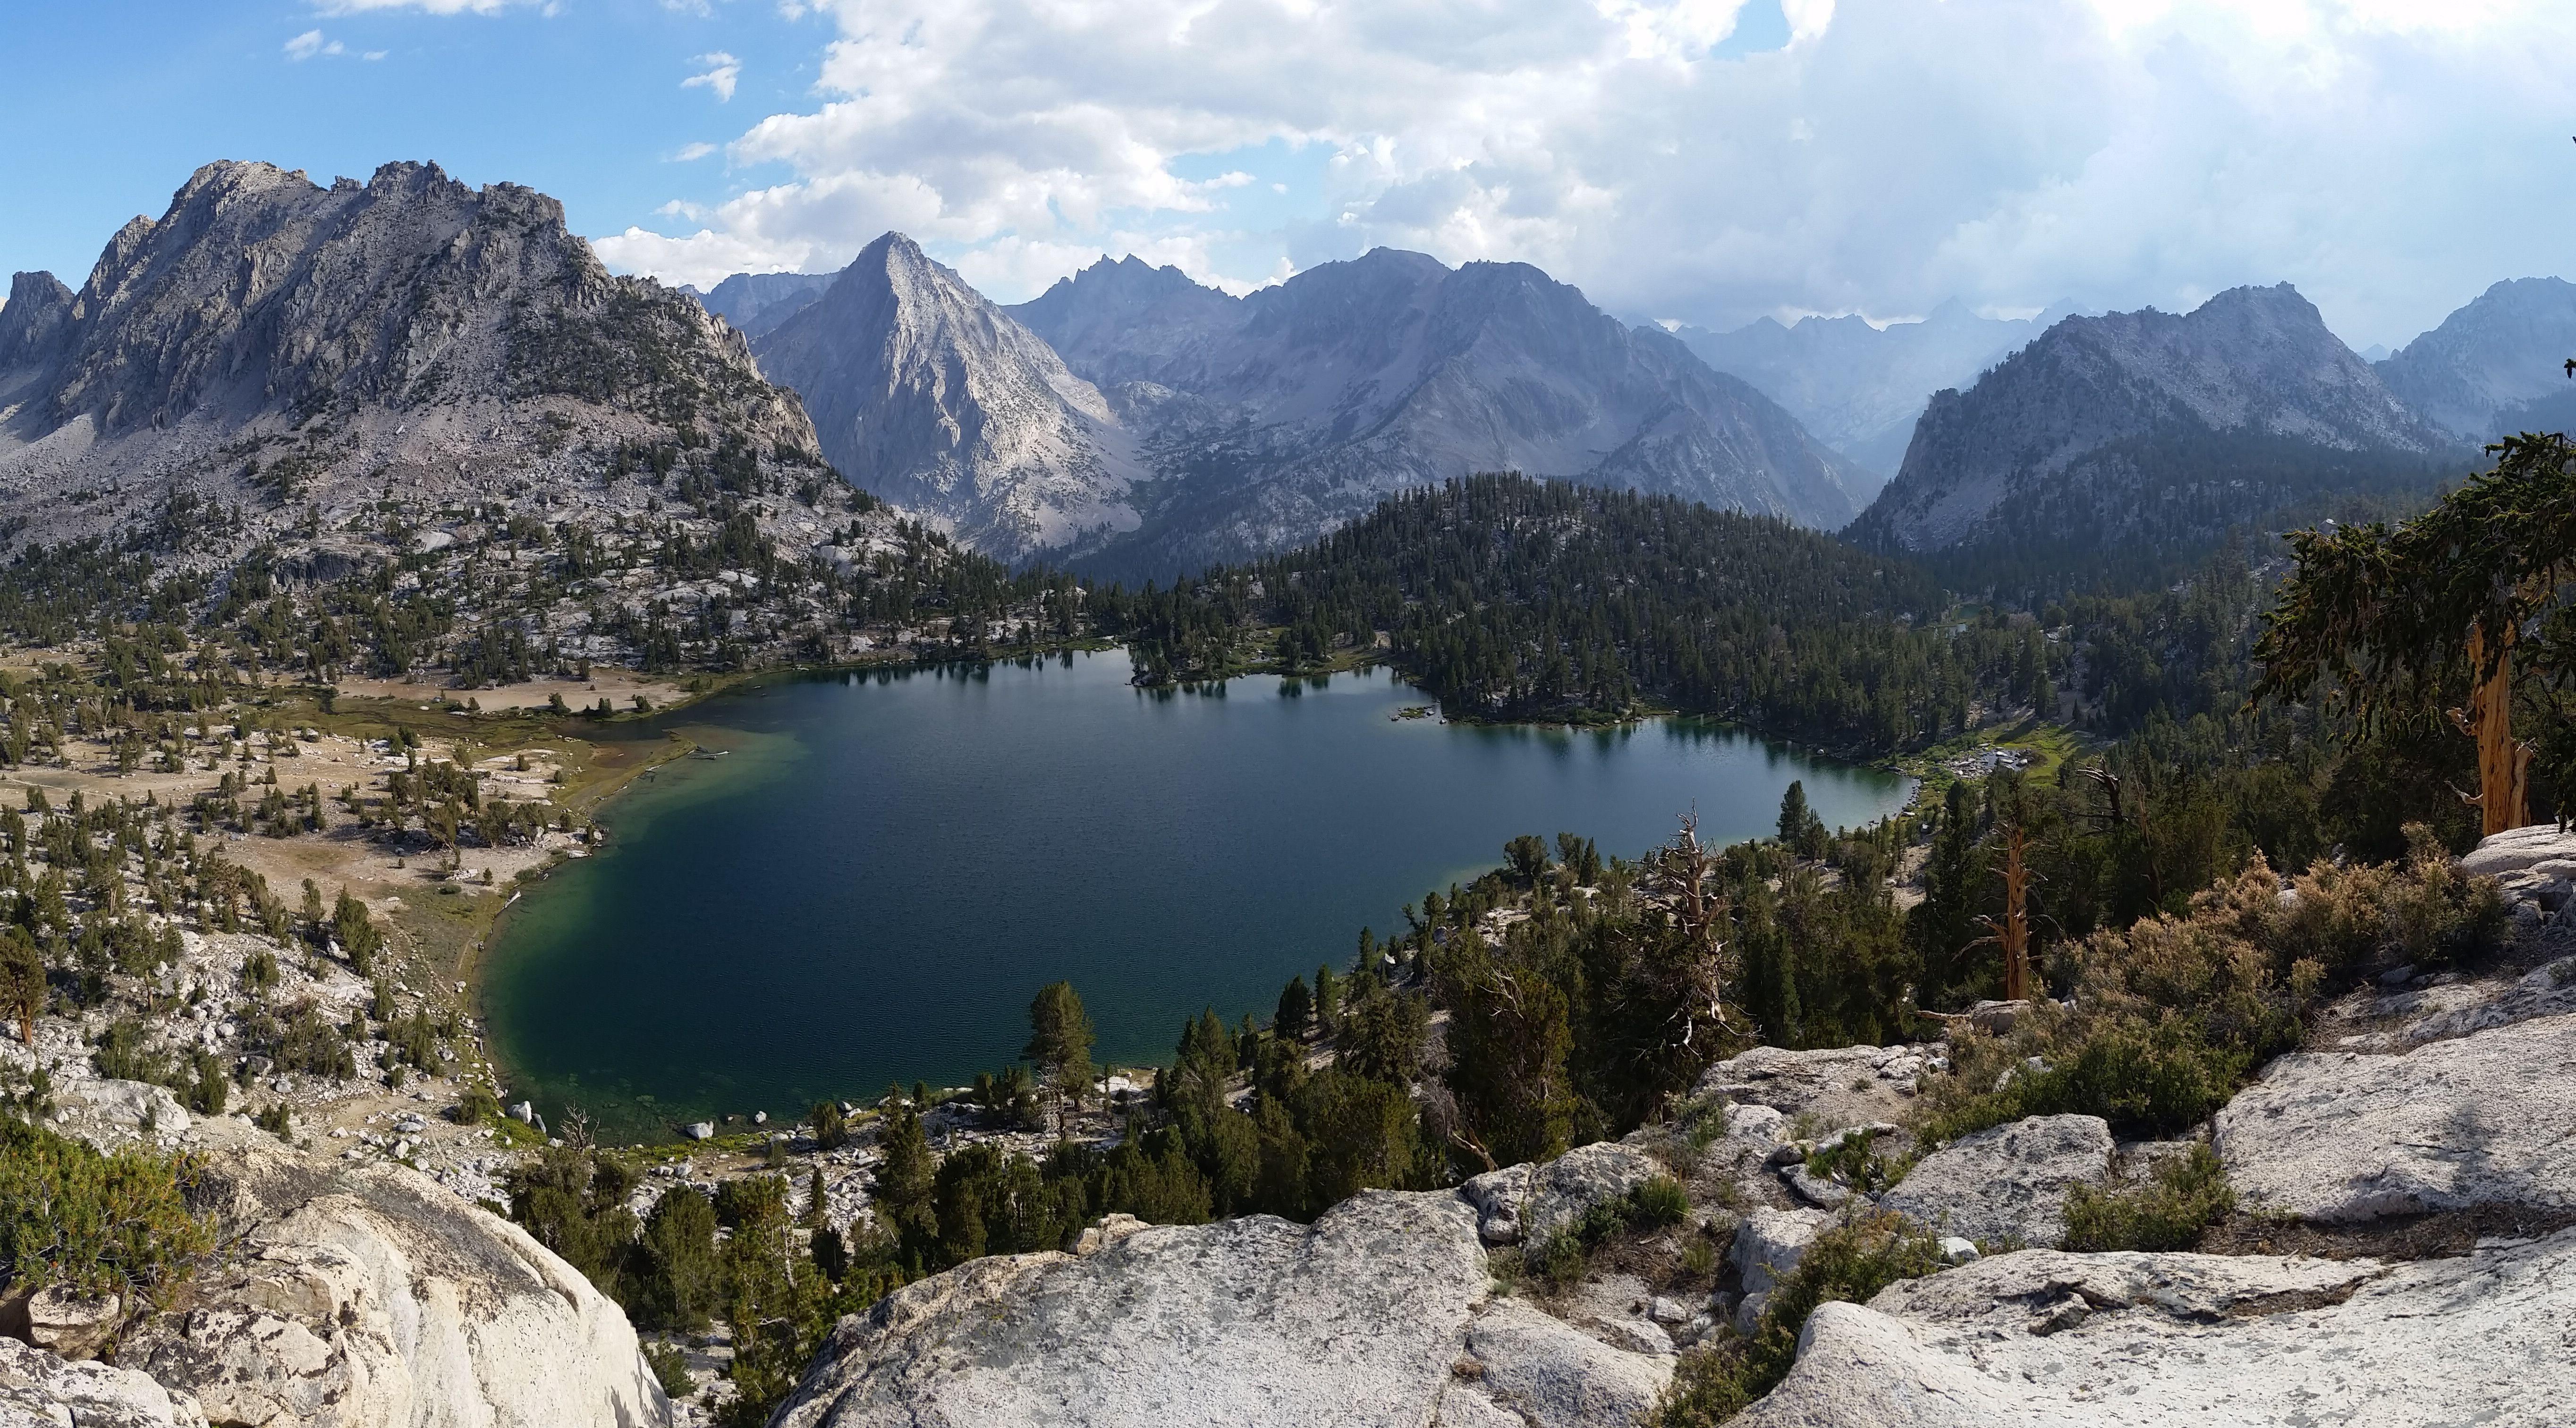 High Quality Kings Canyon National Park Wallpaper. Full HD Picture